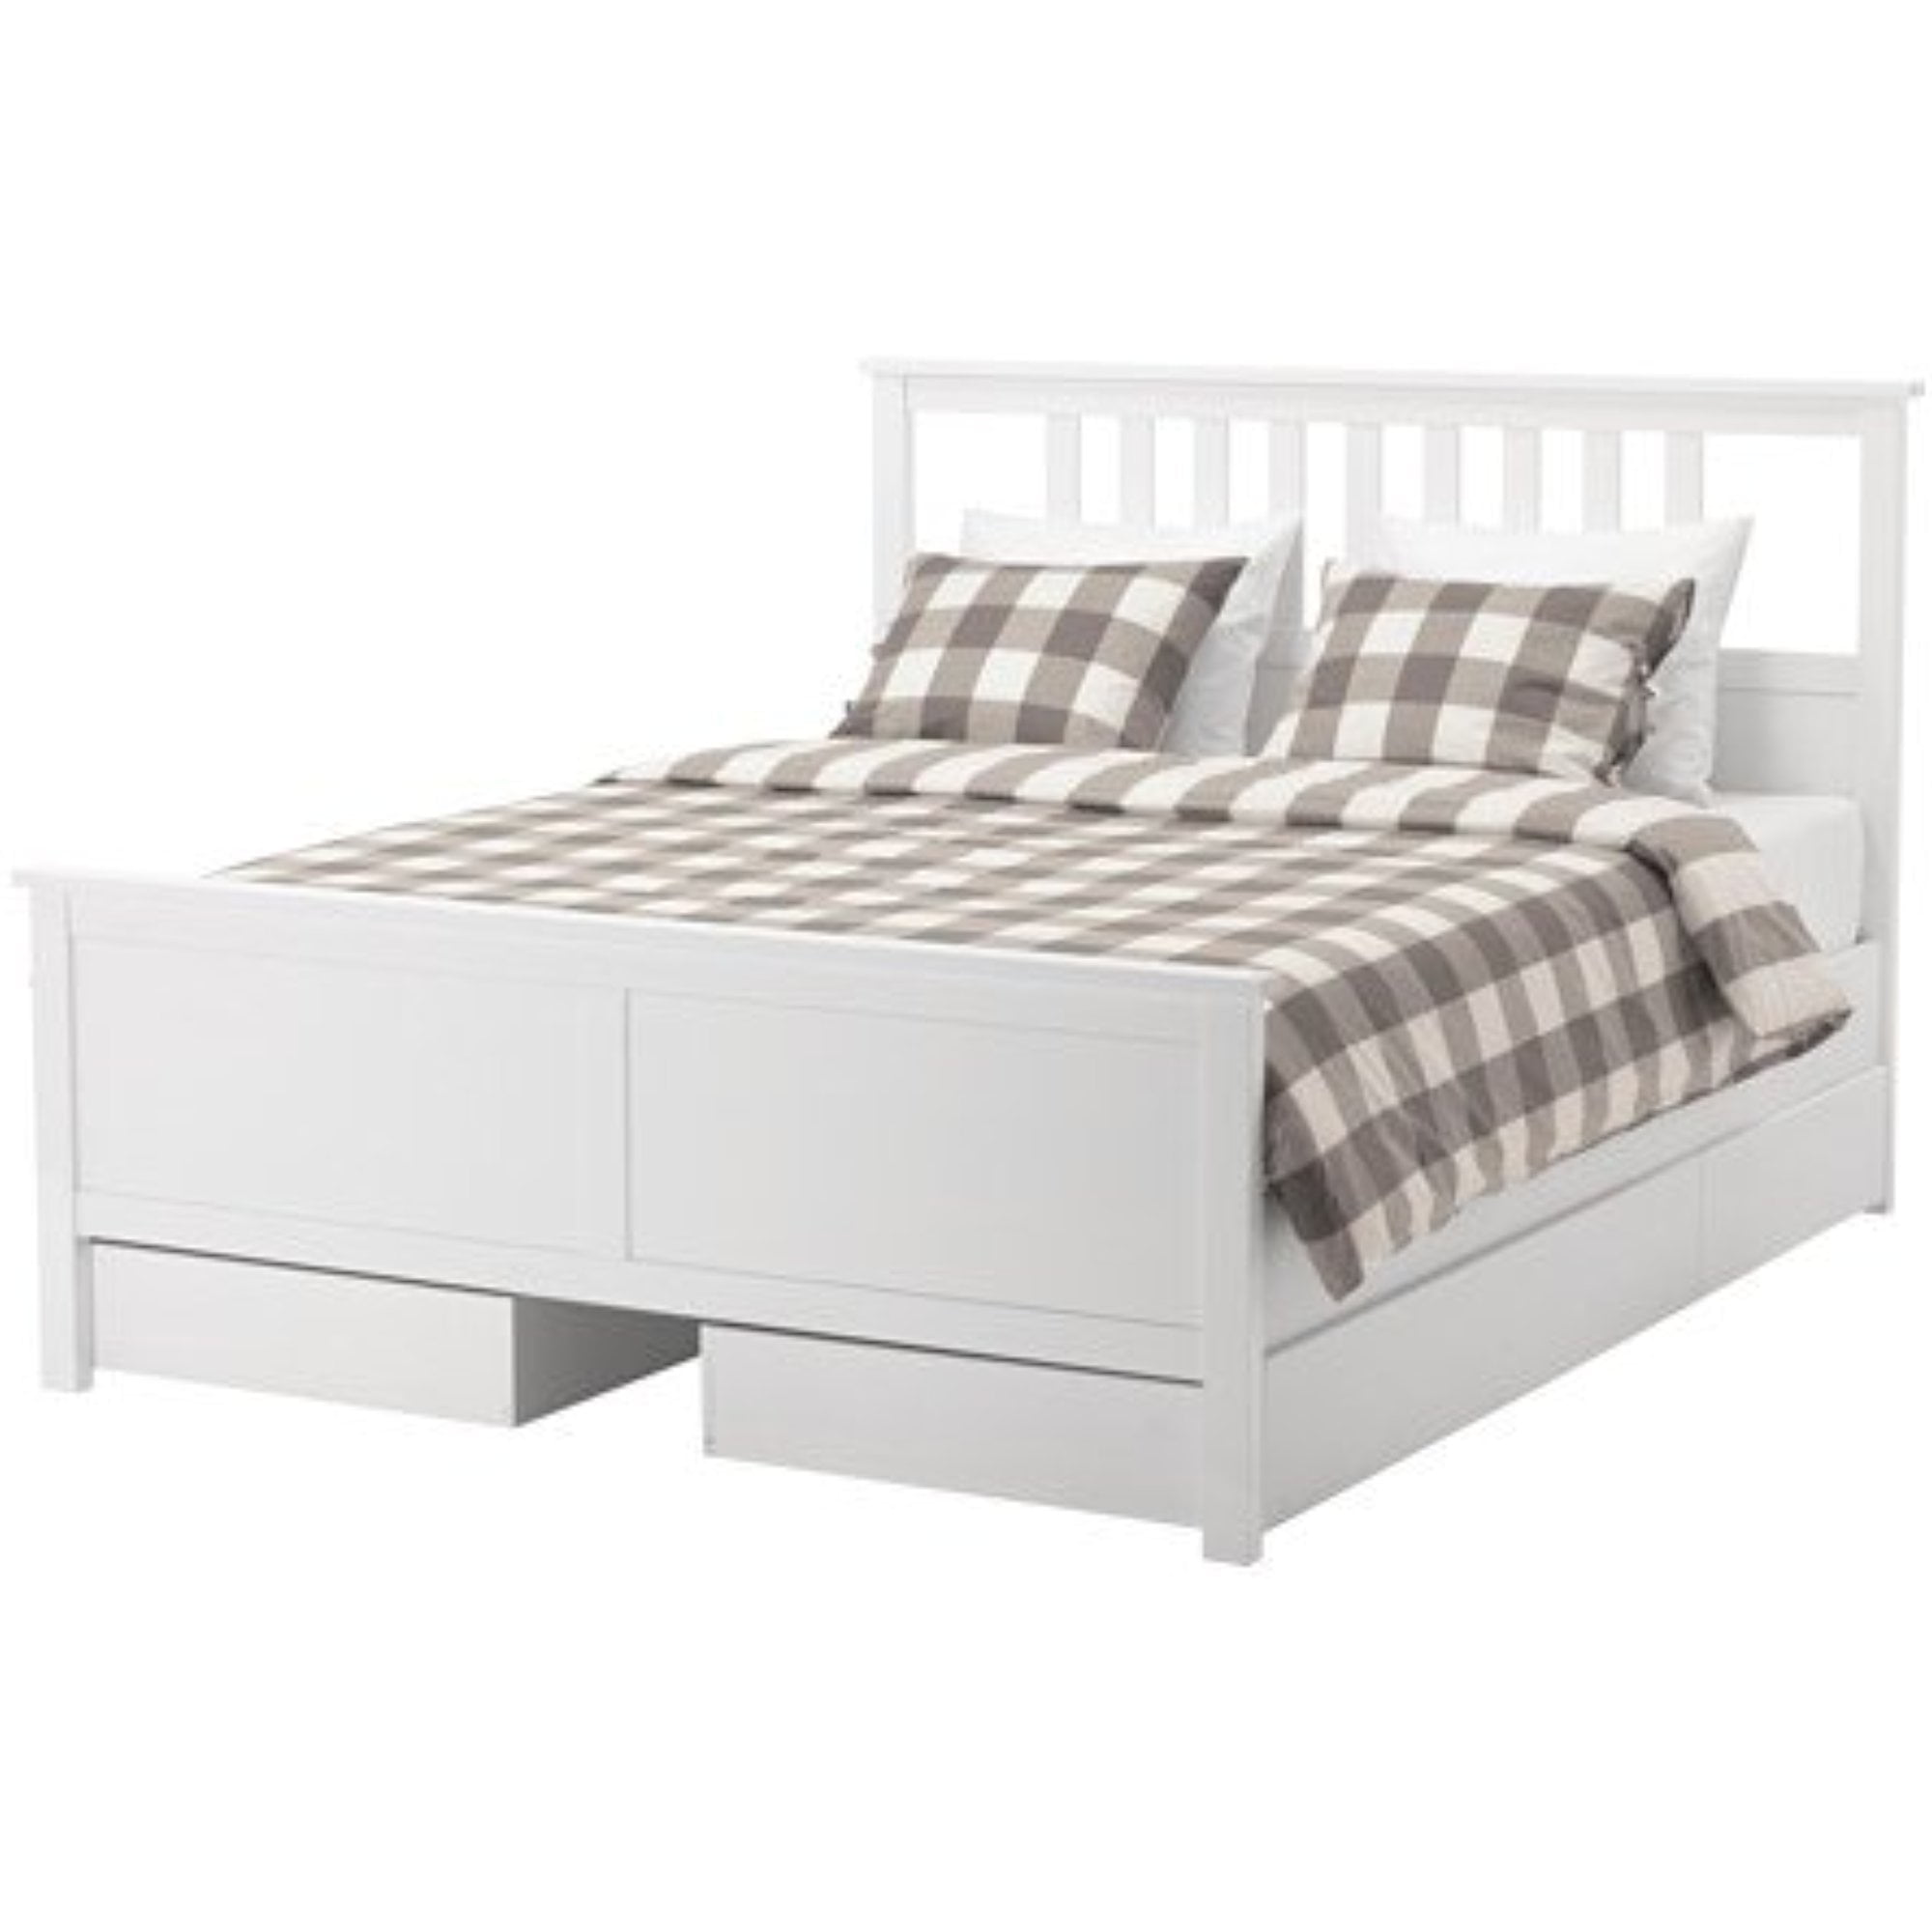 Ikea Queen Size Bed Frame With 4, Diy Rustic Queen Bed Frame With Storage Boxes White Luröy